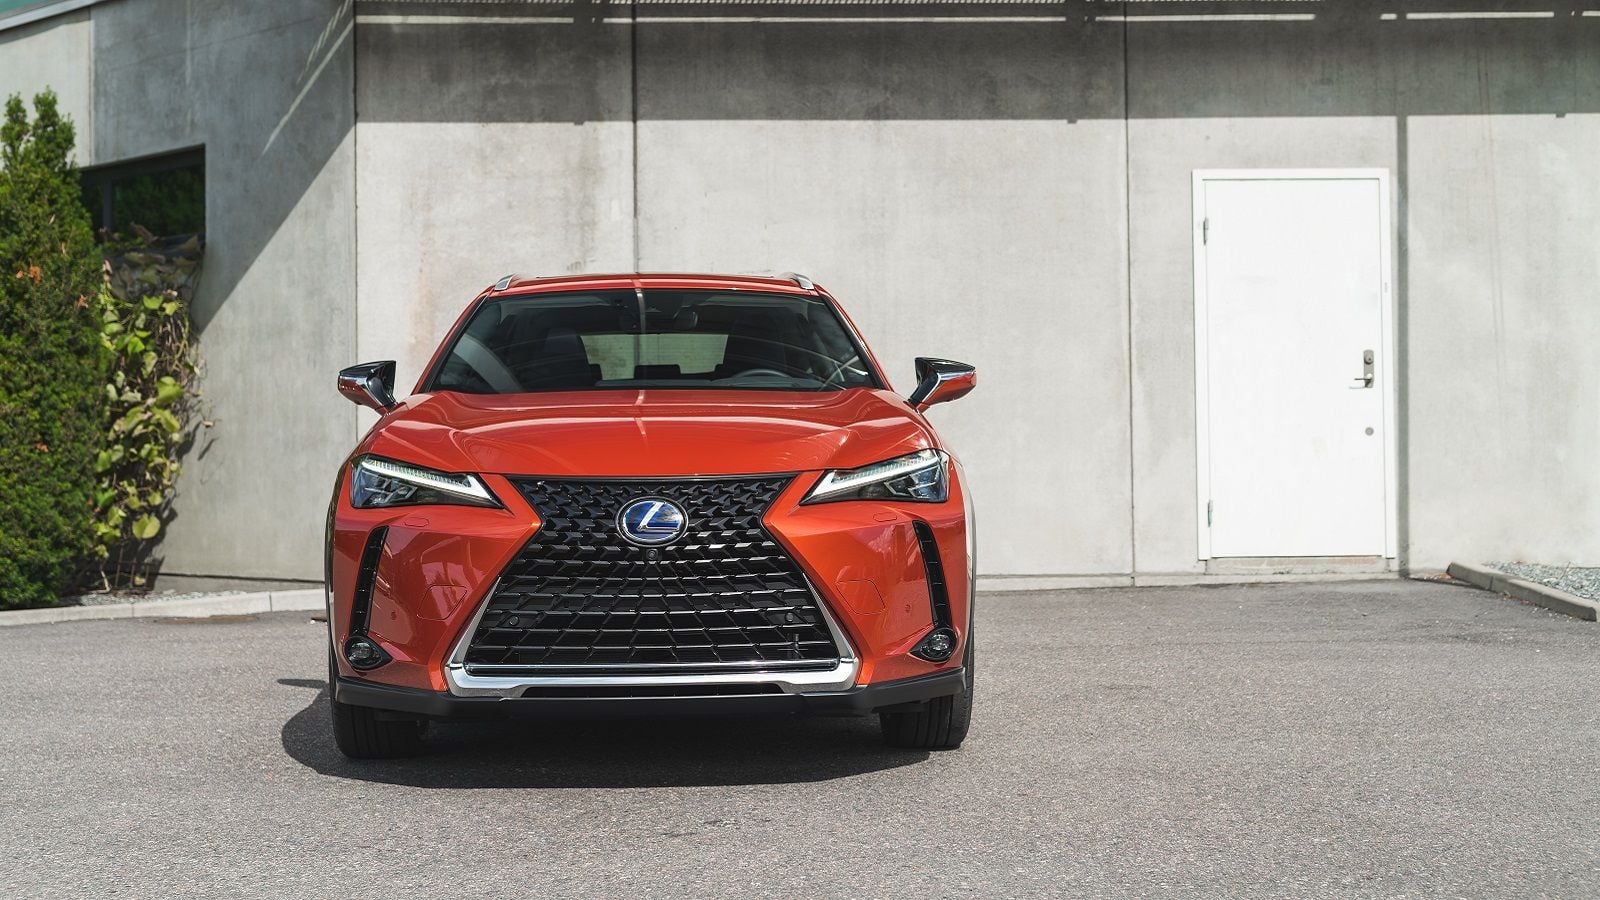 Lexus Launching Subscription Service in Select Cities